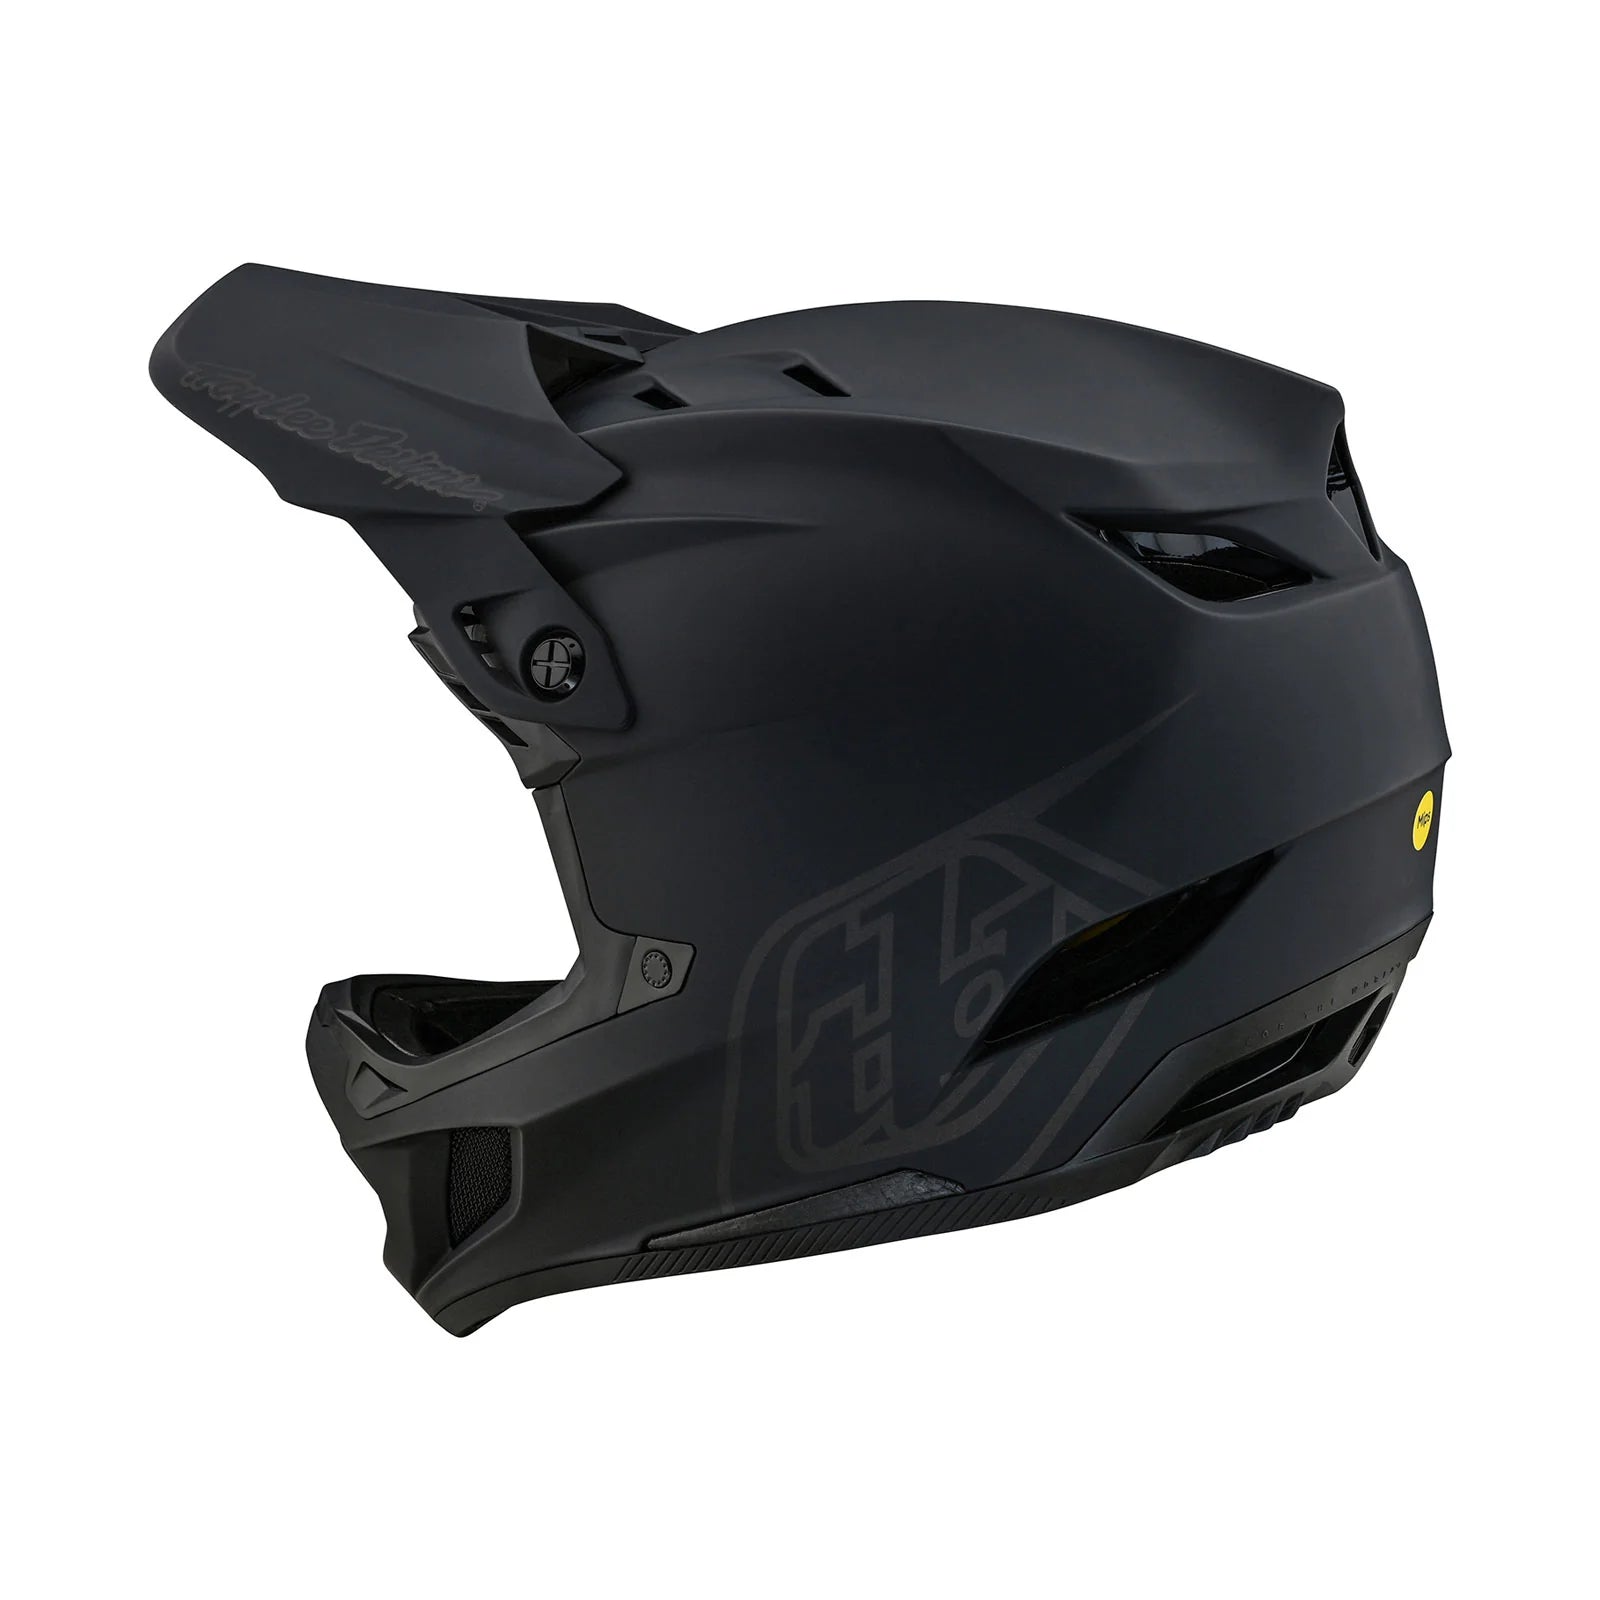 A TLD D4 AS Composite Helmet W/MIPS Stealth Black featuring the Mips® C2 protection system on a white background.